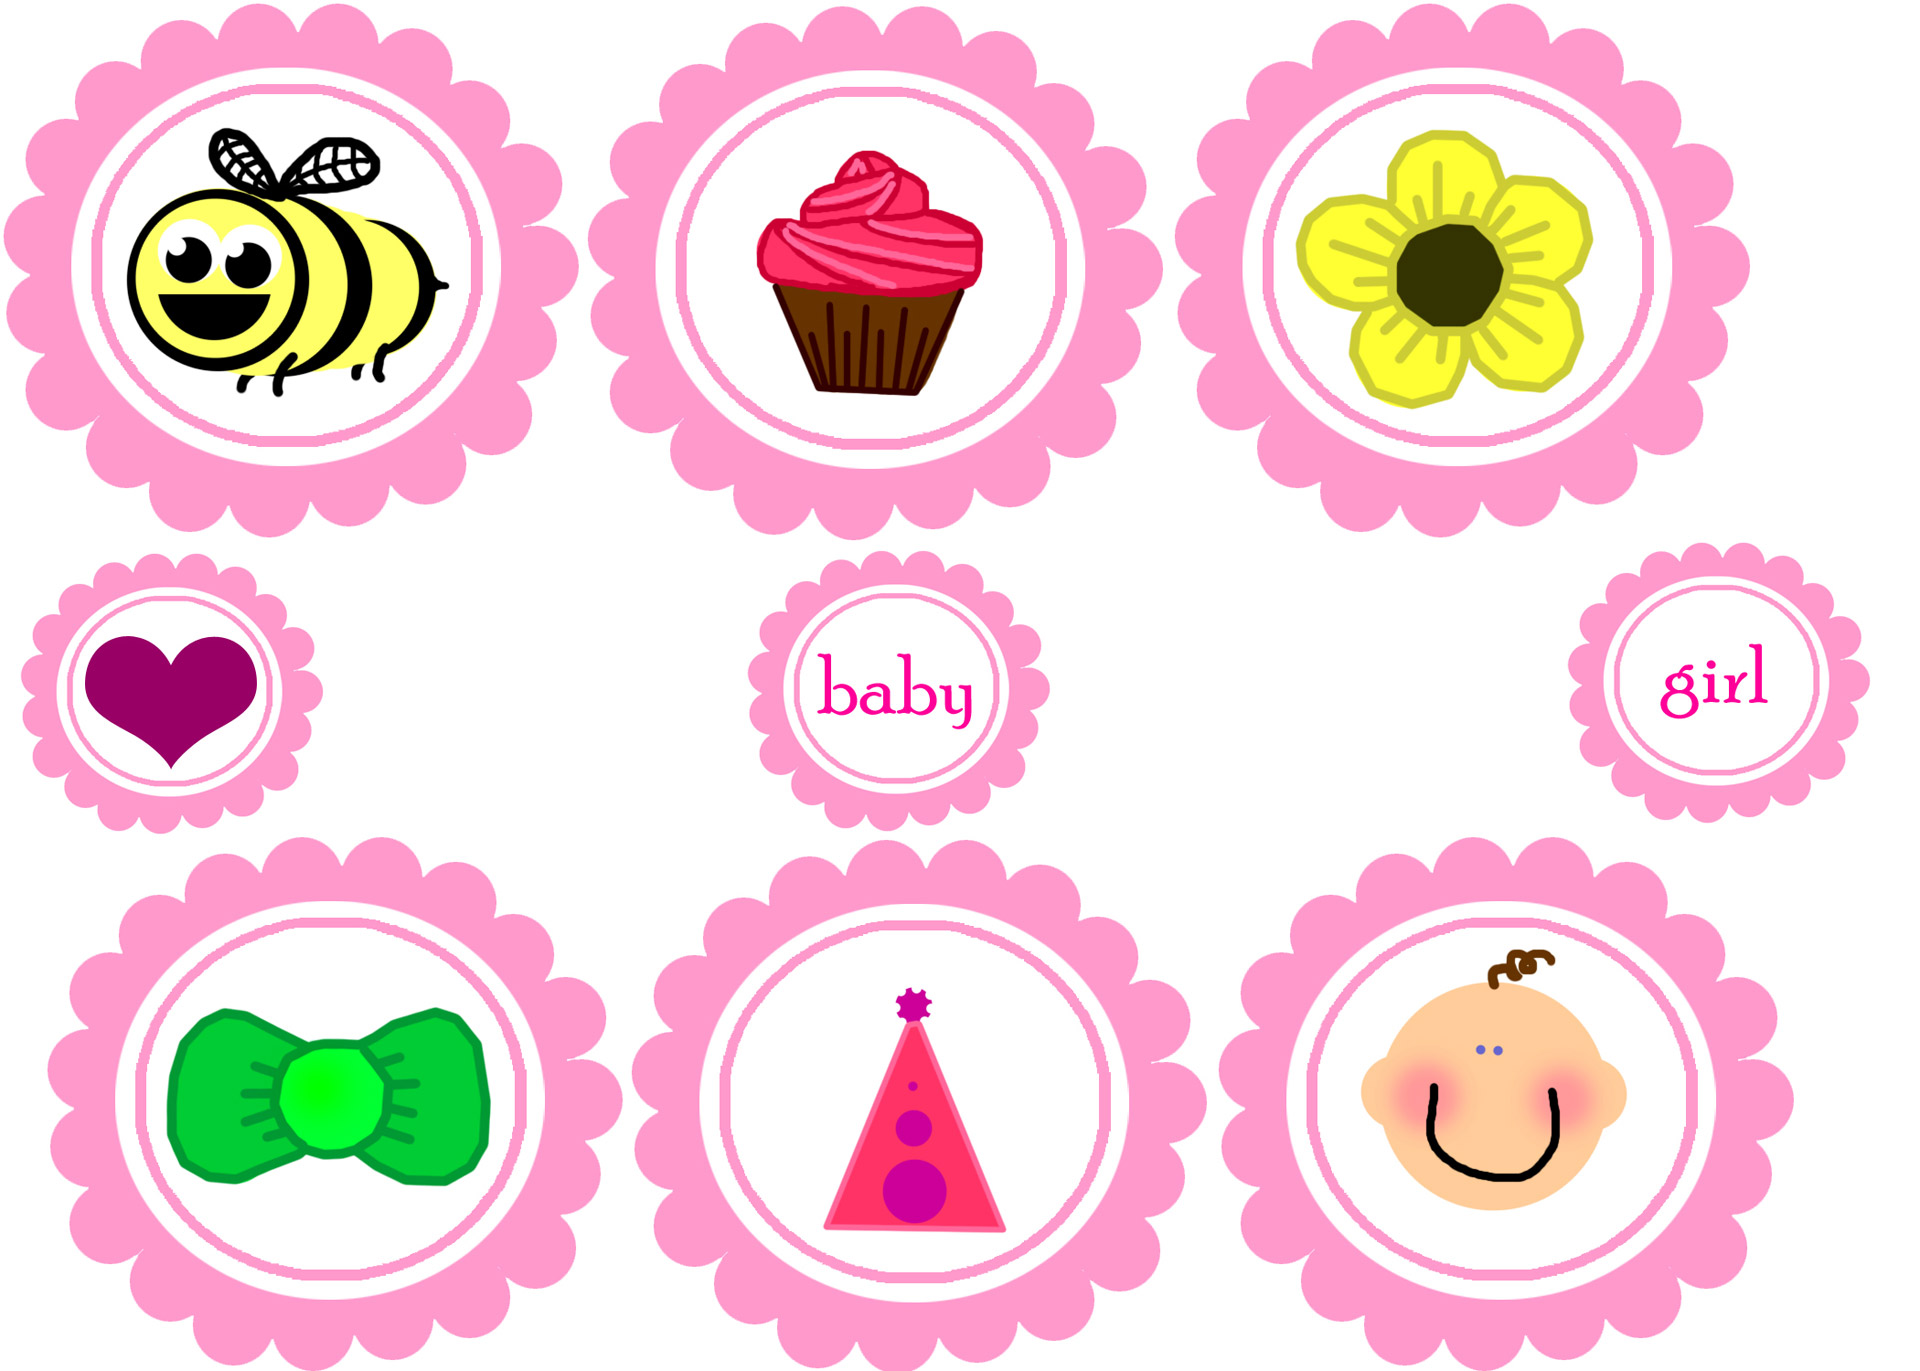 What Will Baby Bee? Gender Reveal Party Cupcakes